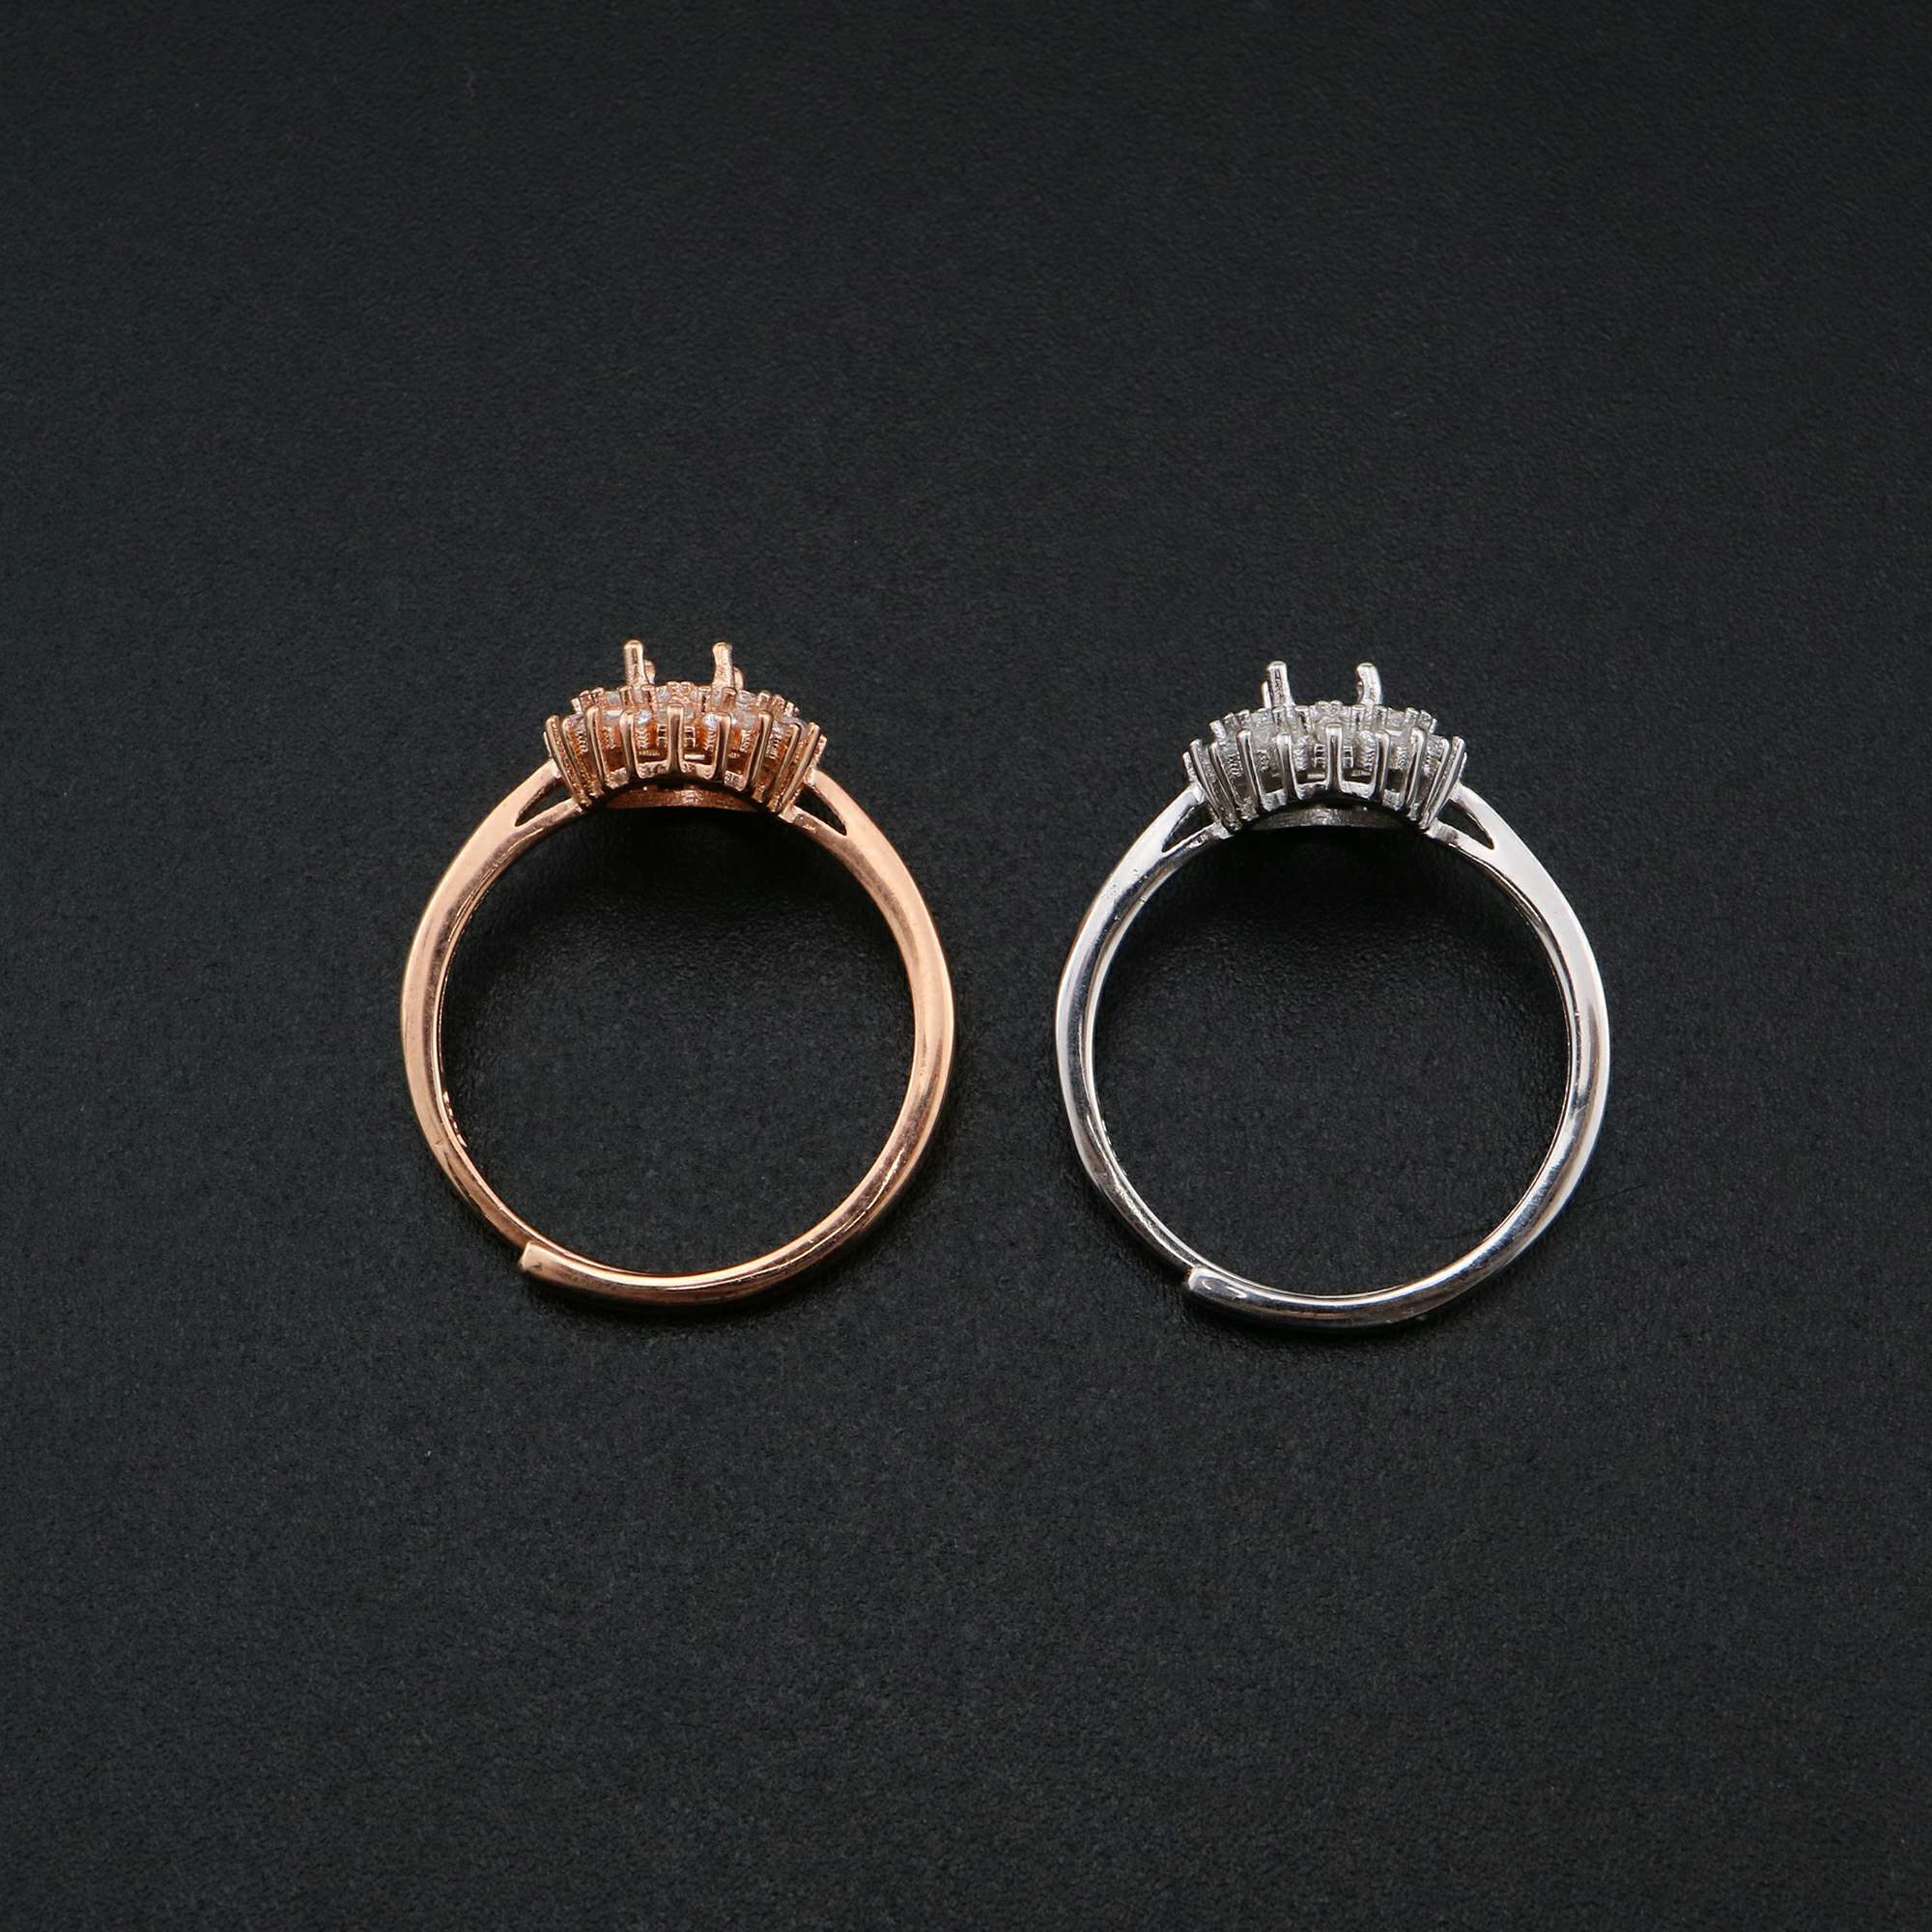 1Pcs 4x6MM Oval Prong Ring Settings Blank Adjustable Vintage Style Rose Gold Plated Solid 925 Sterling Silver DIY Bezel Tray for Gemstone 1224053 - Click Image to Close